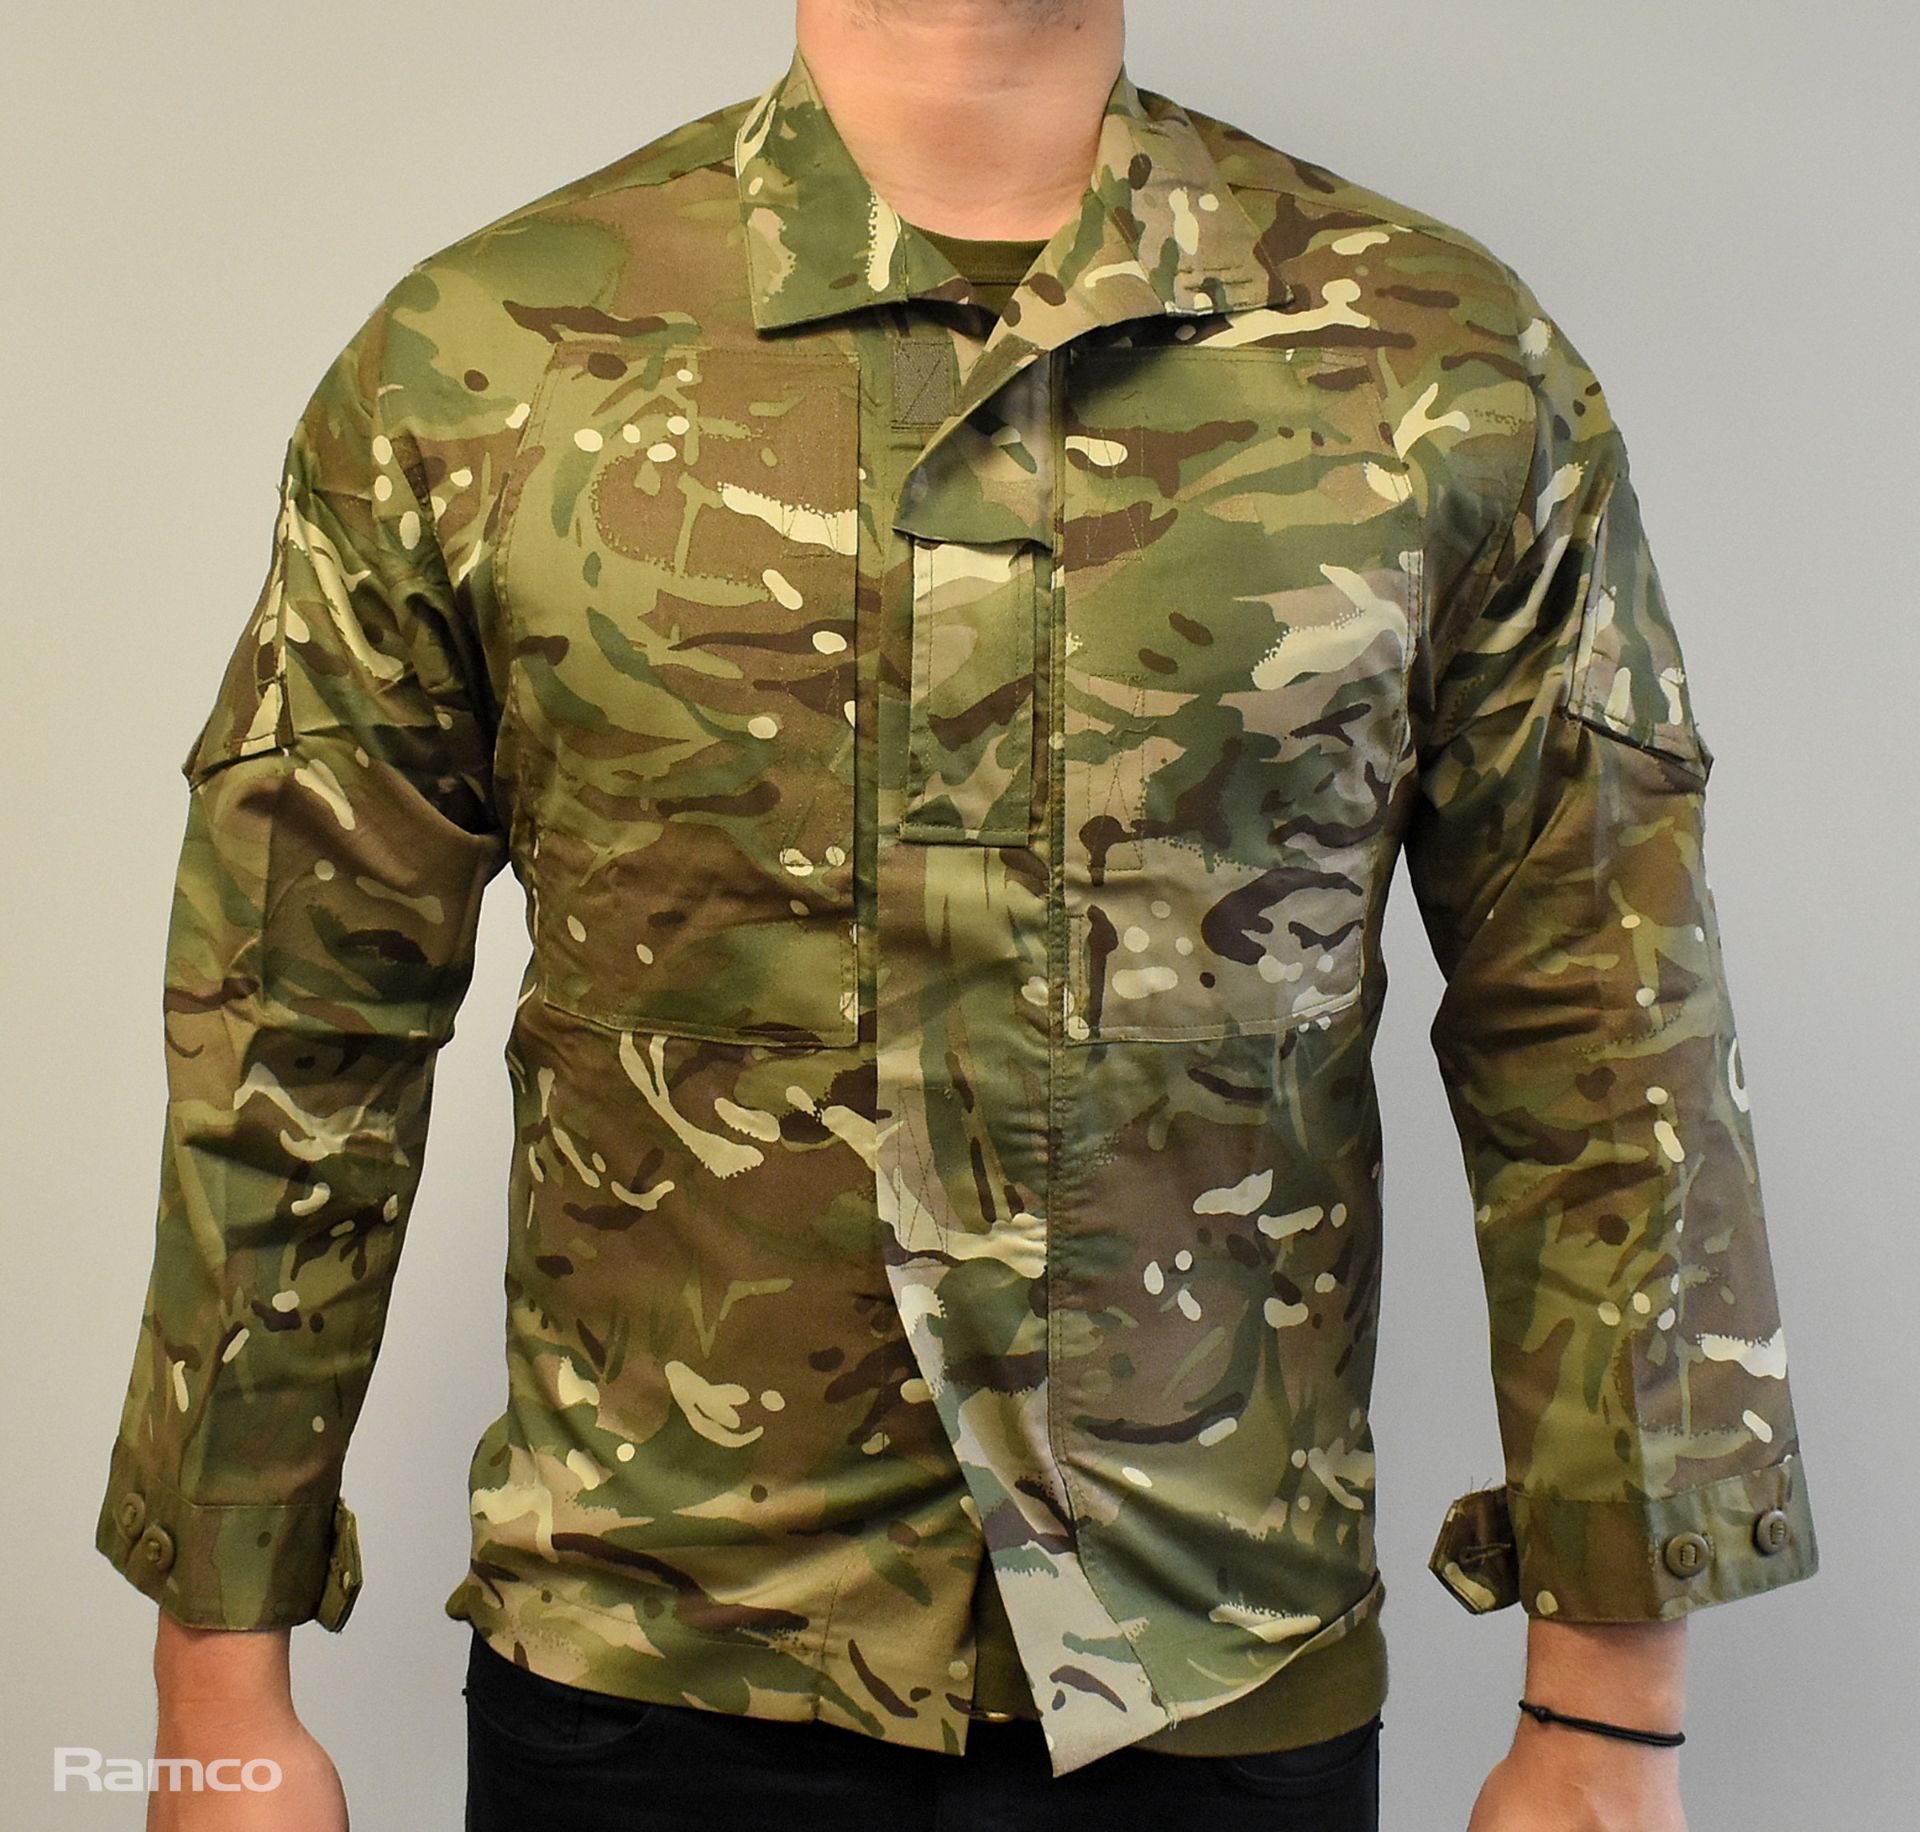 100x British Army MTP combat jackets - mixed types - mixed grades and sizes